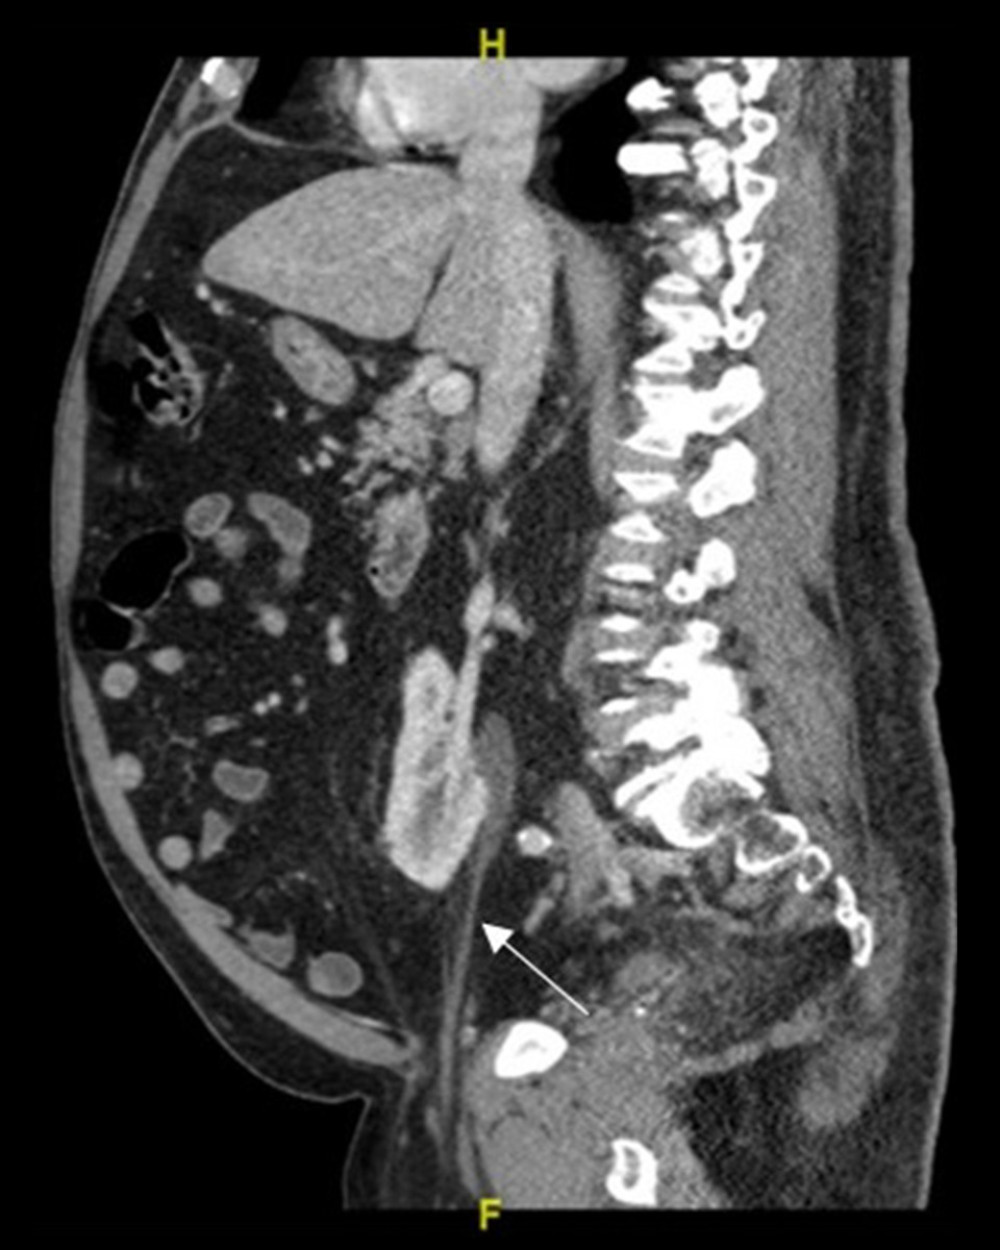 Sagittal computed tomography scan of the abdomen and pelvis in a 67-year-old man with ureteroinguinal hernia as well as right renal ptosis and hydronephrosis. The right ureter descending into a right inguinal hernia is visible in the image (arrow).